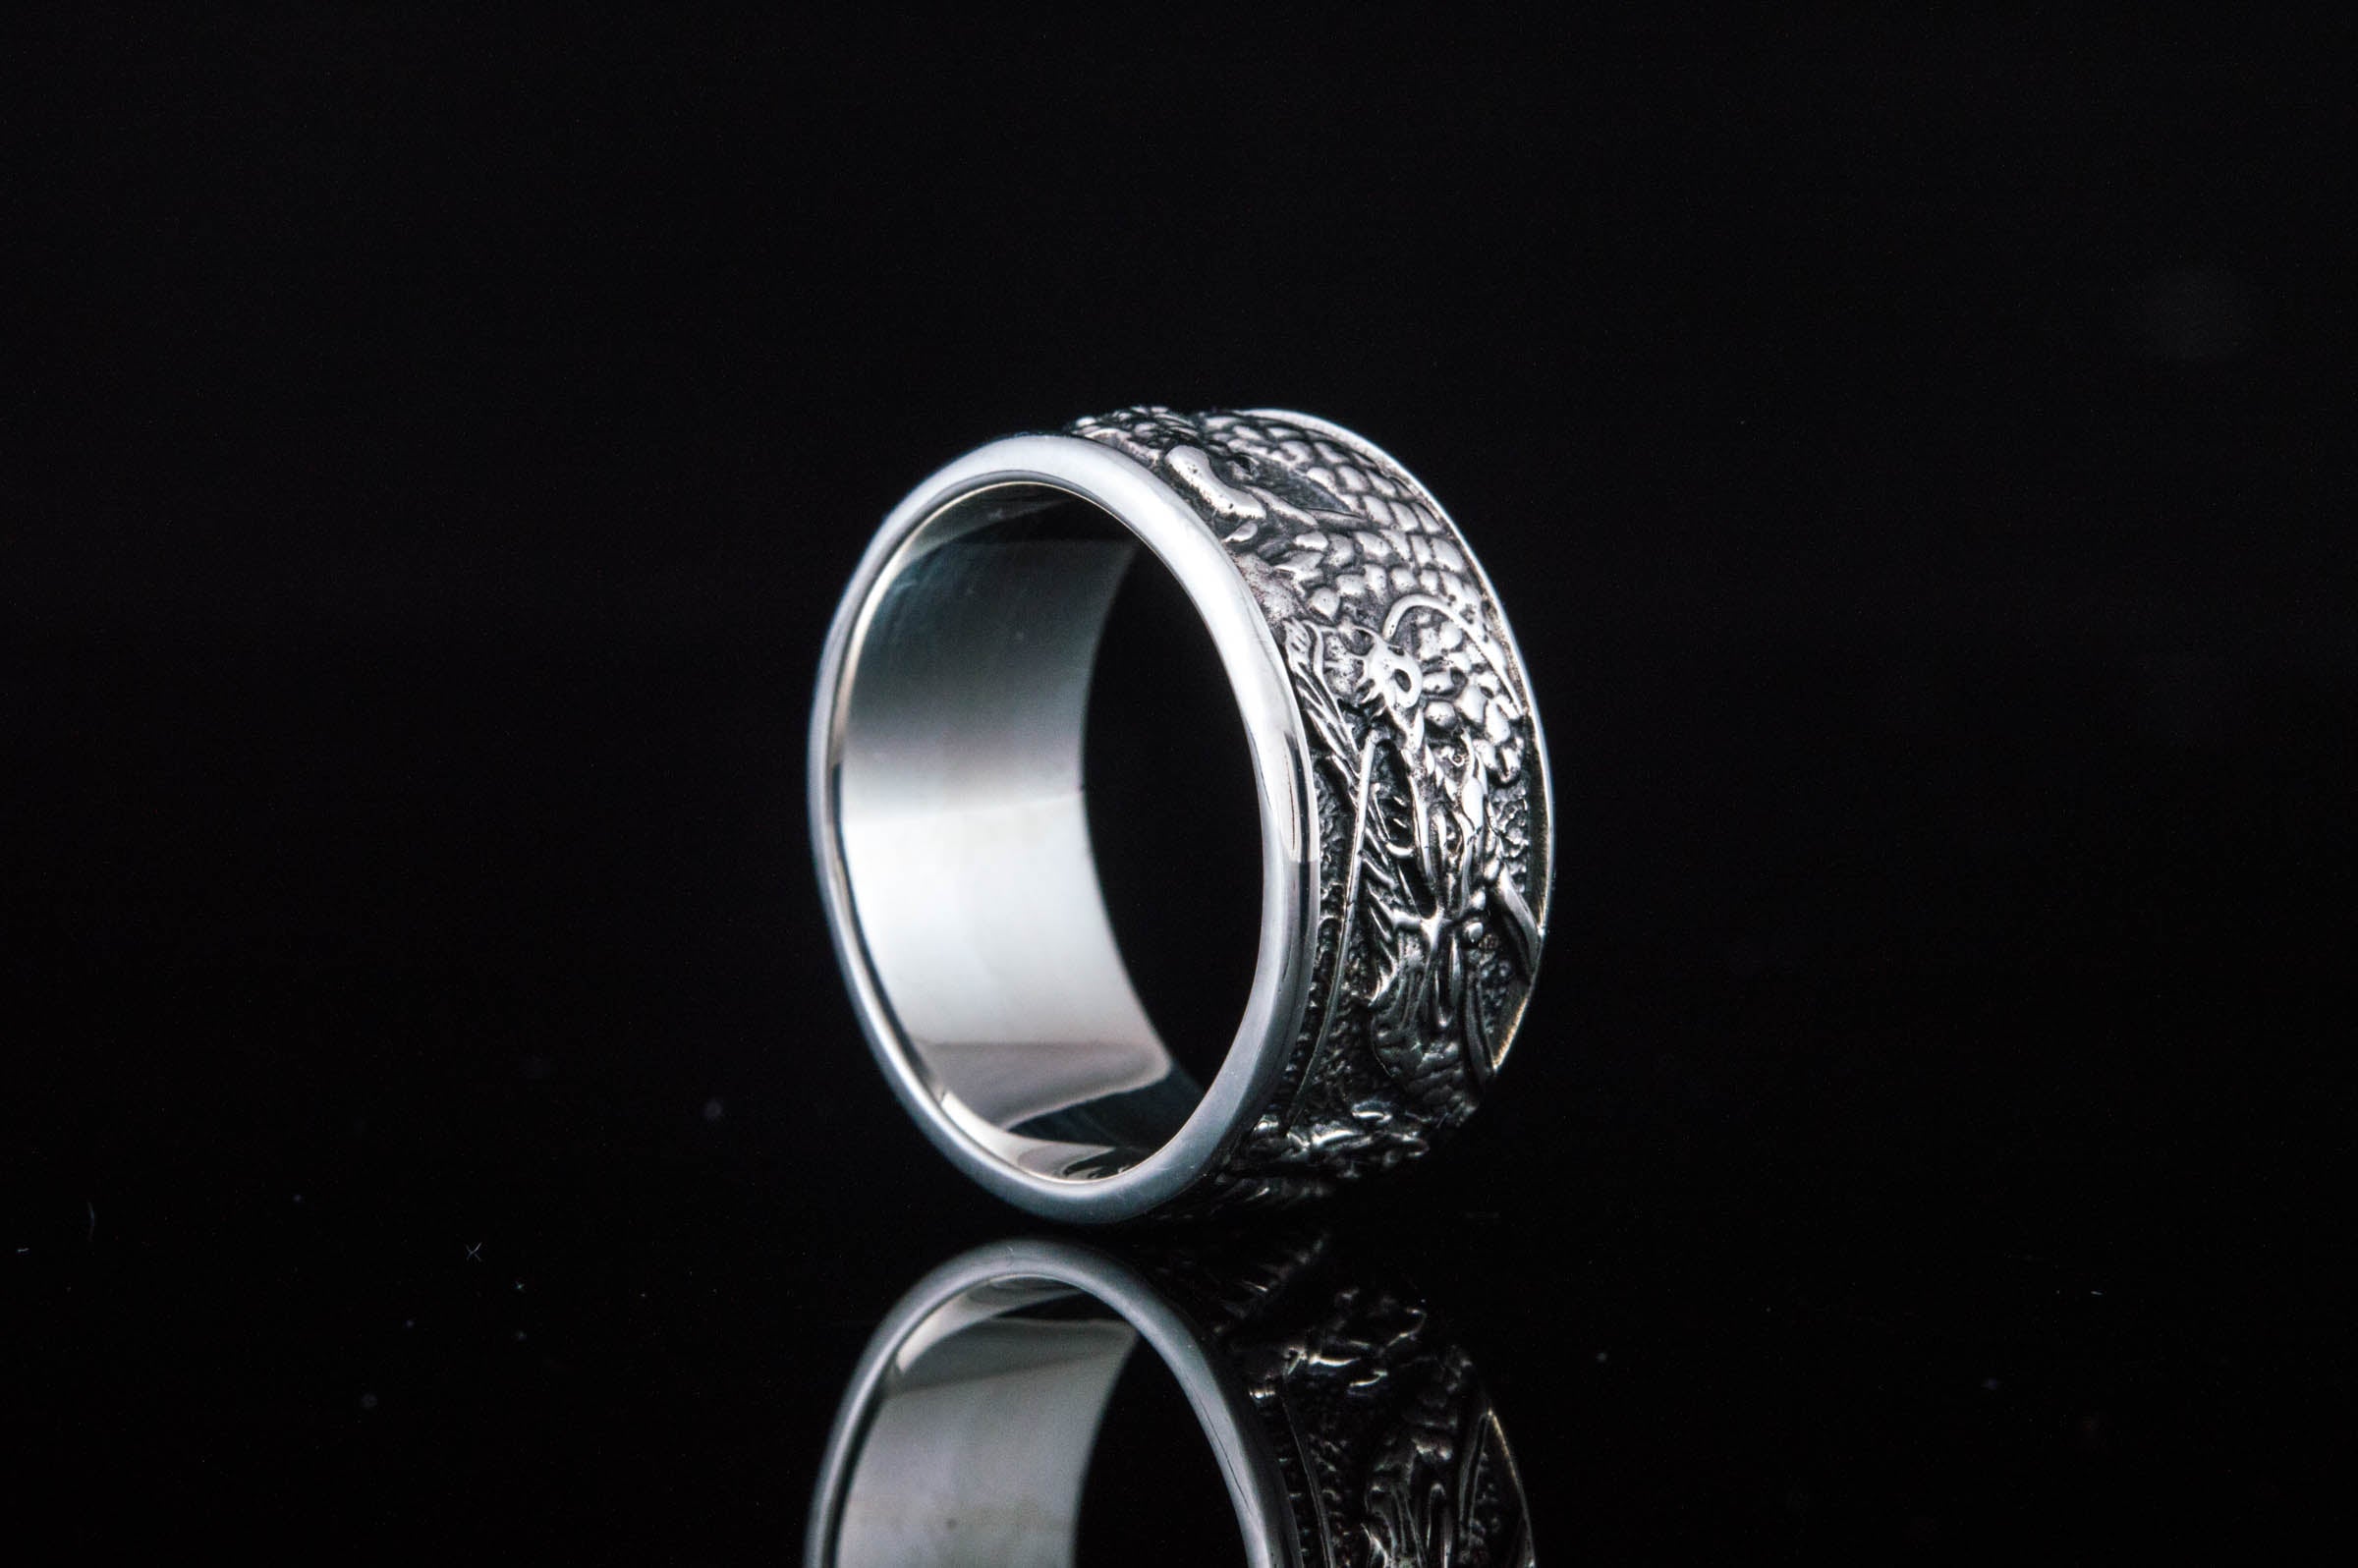 Ring with Dragon Symbol Sterling Silver Handmade Jewelry